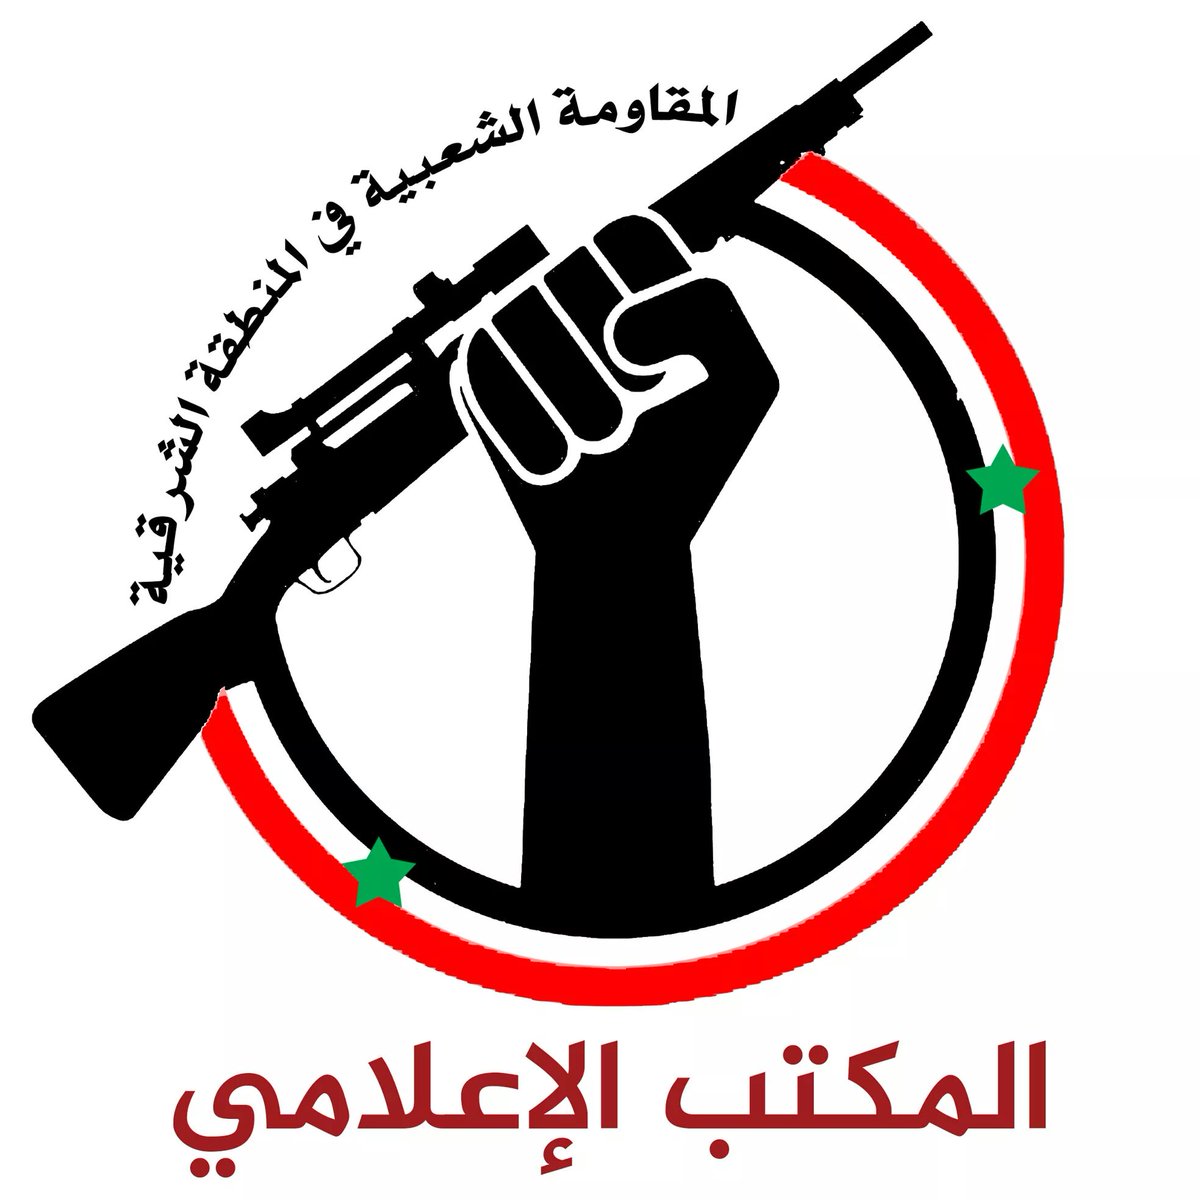 The logo of the Popular Resistance of Raqqa. (Twitter)